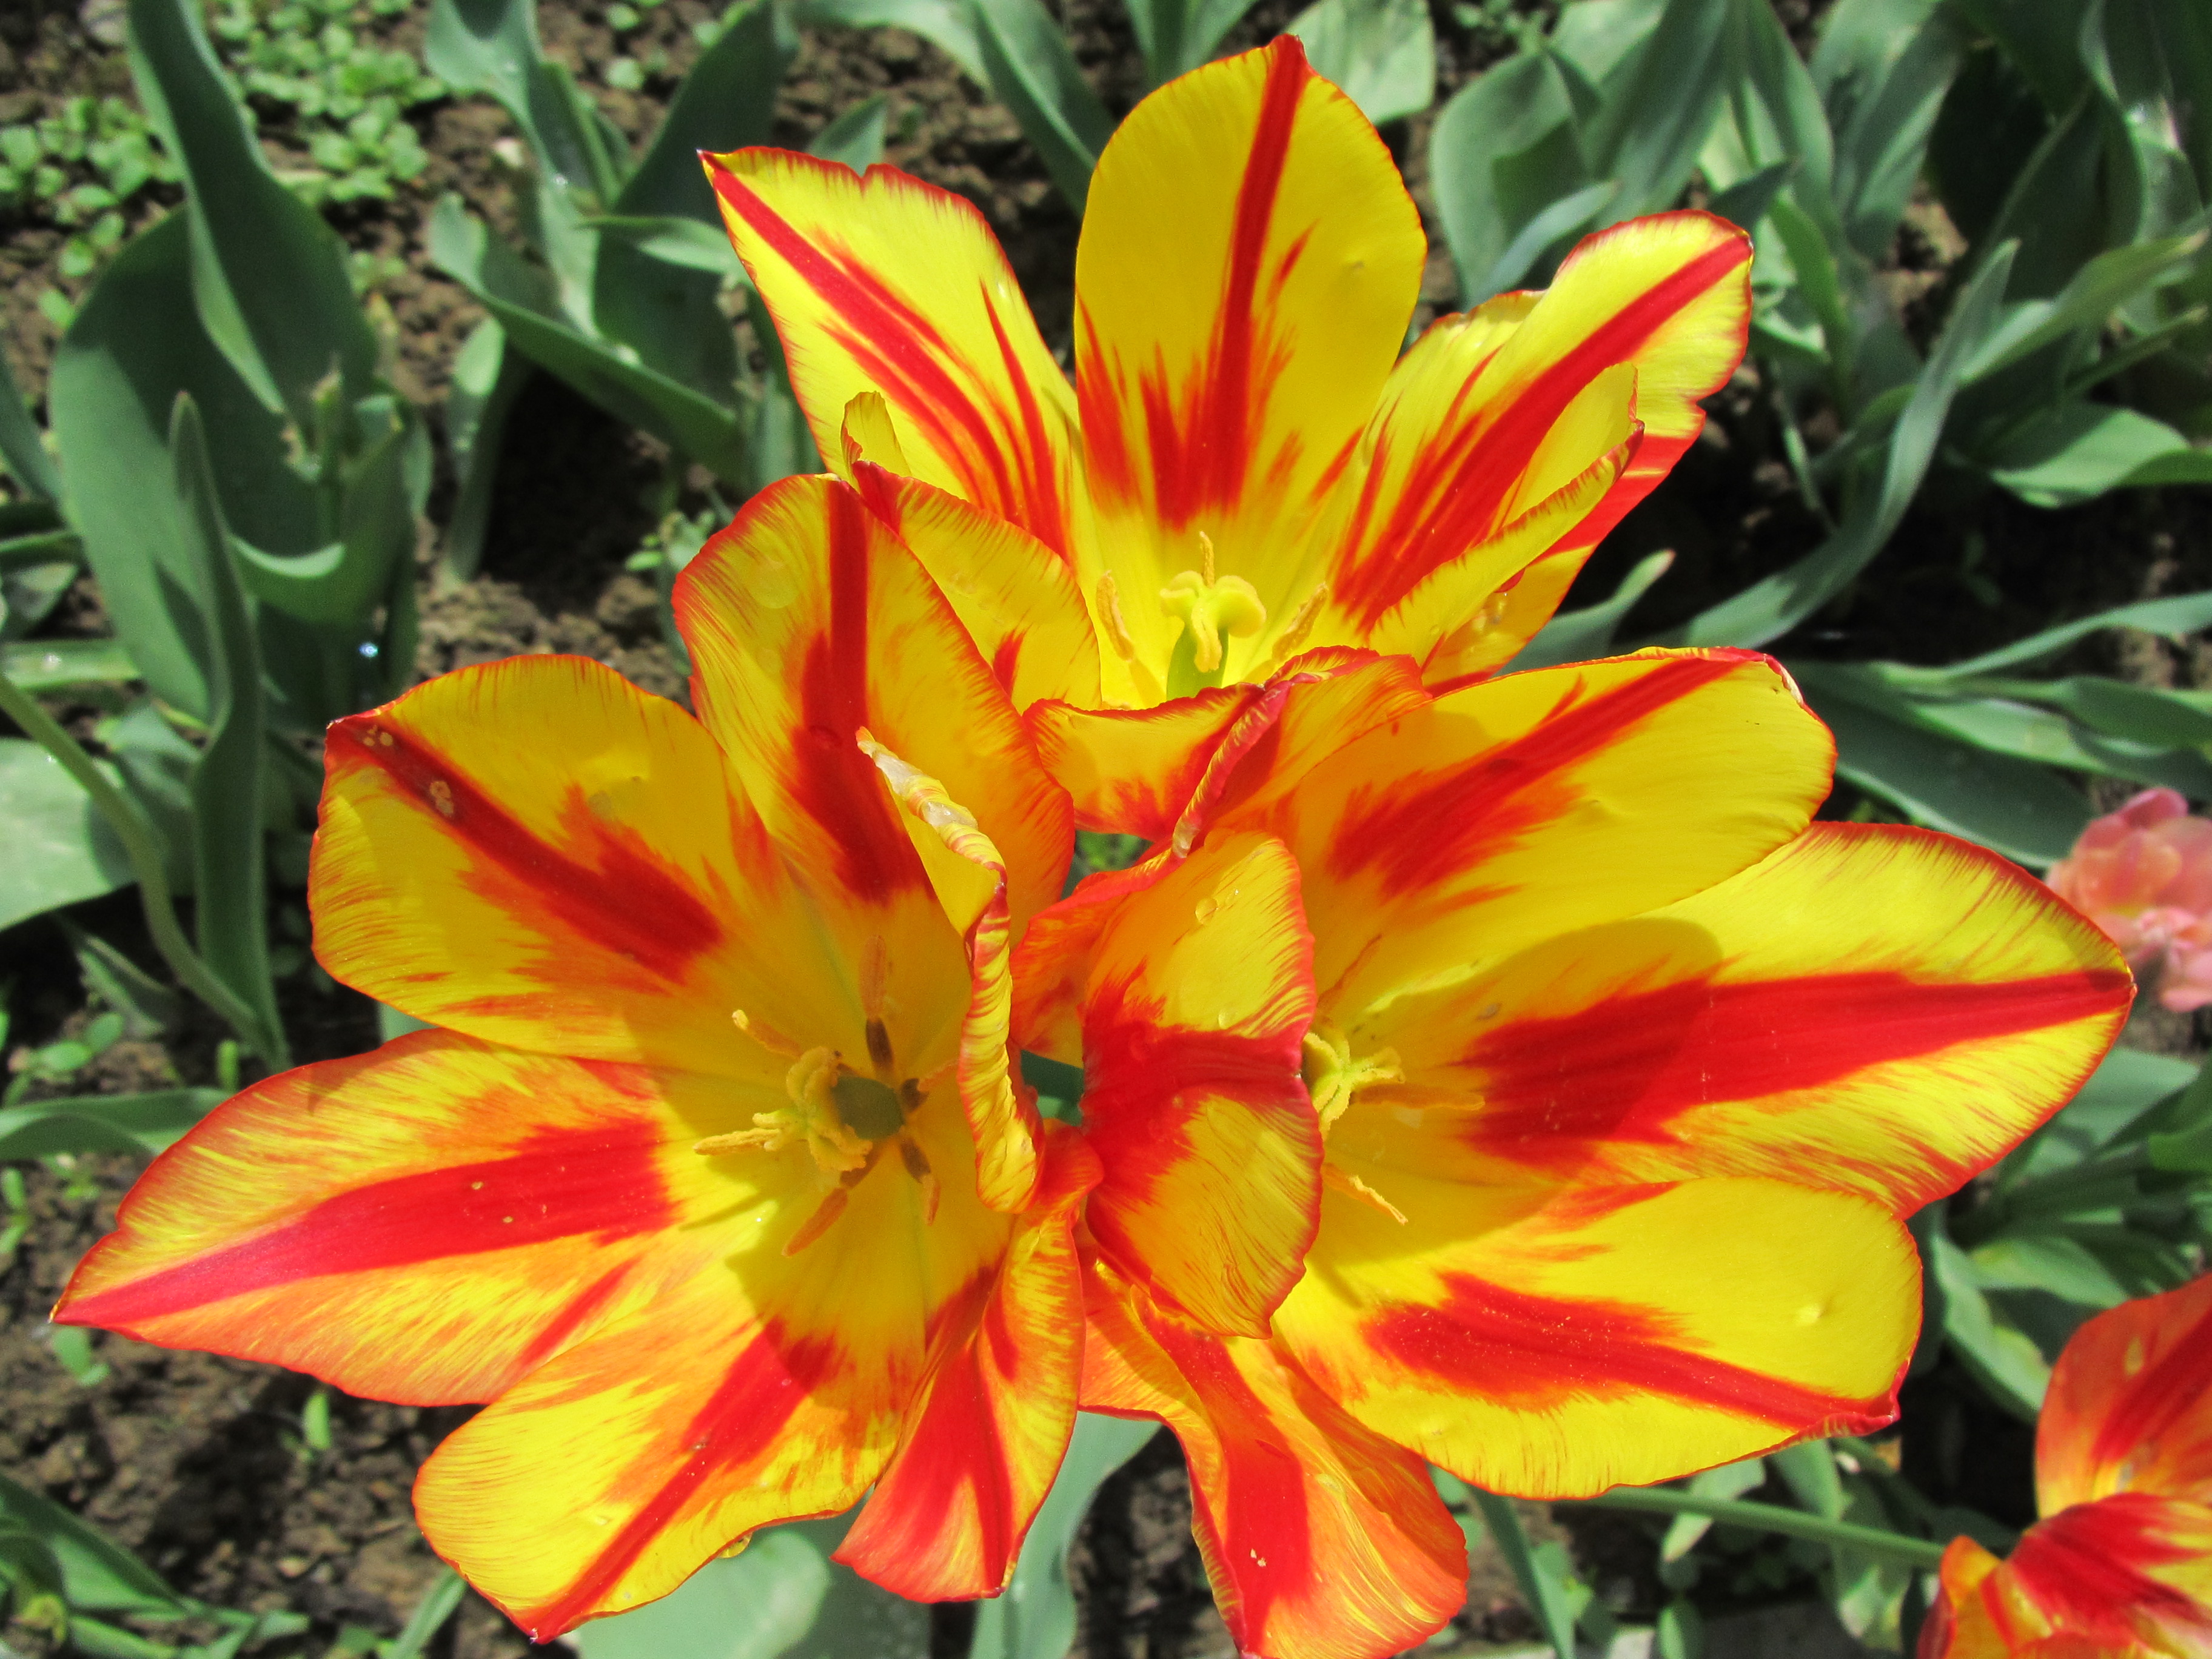 Yellow and red tulips photo